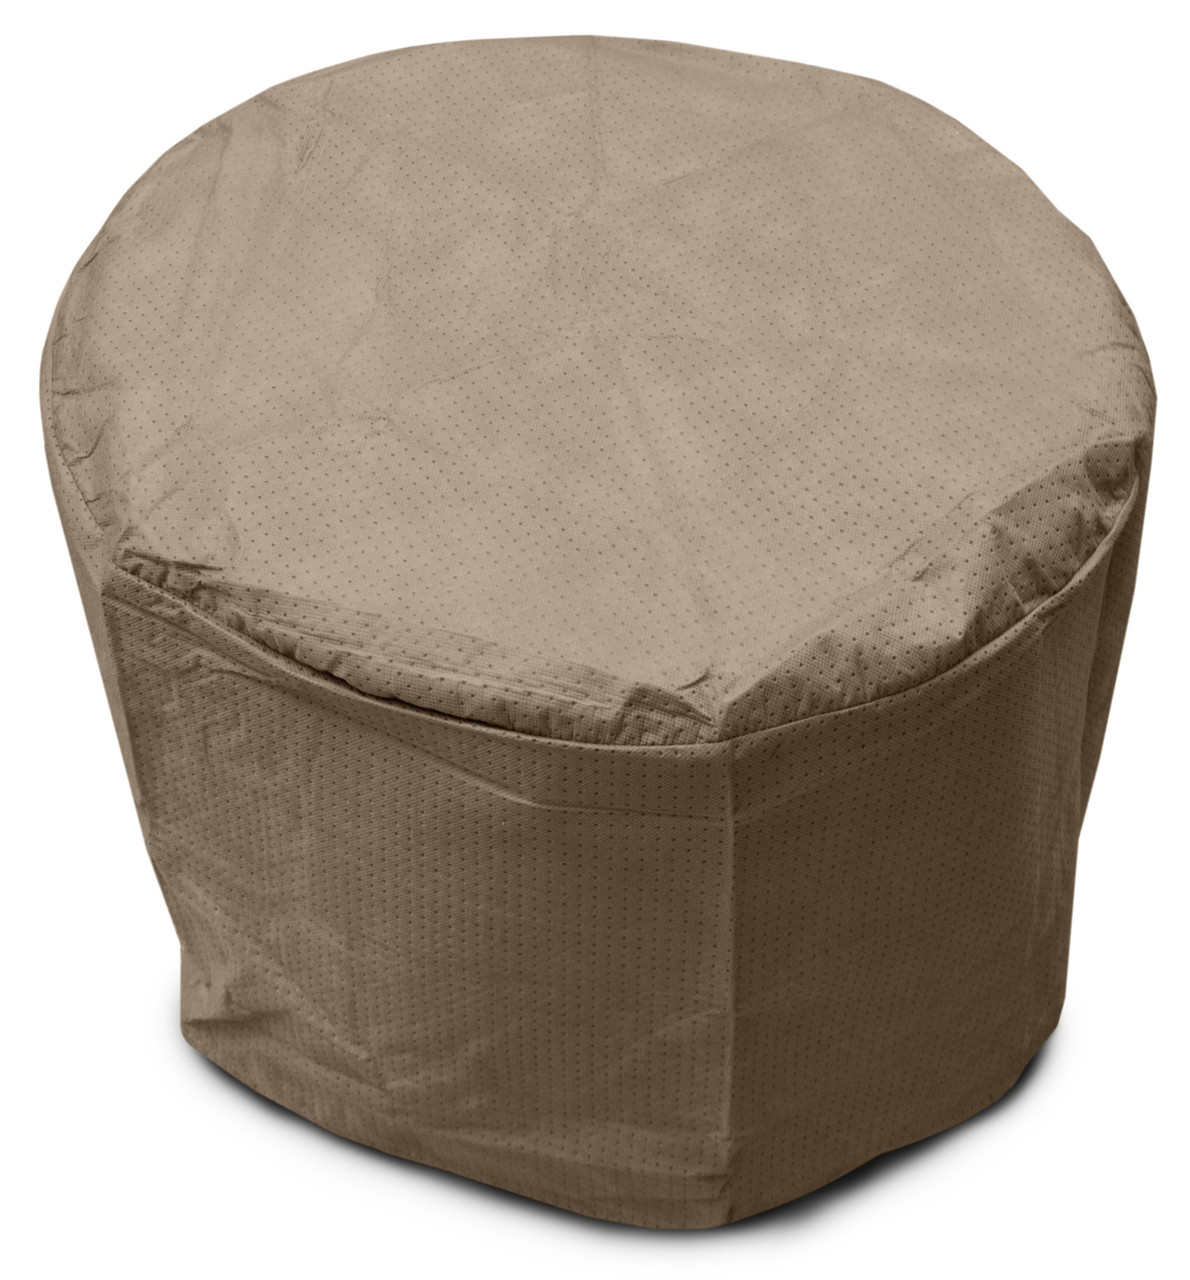 Hohong Outdoor Patio Furniture Covers Pool Side Small Bar Cooler Table Cover Fill and Chill Table Cover Waterproof Beer Garden Round Cover Folding Coffee Table Covers for Keter 